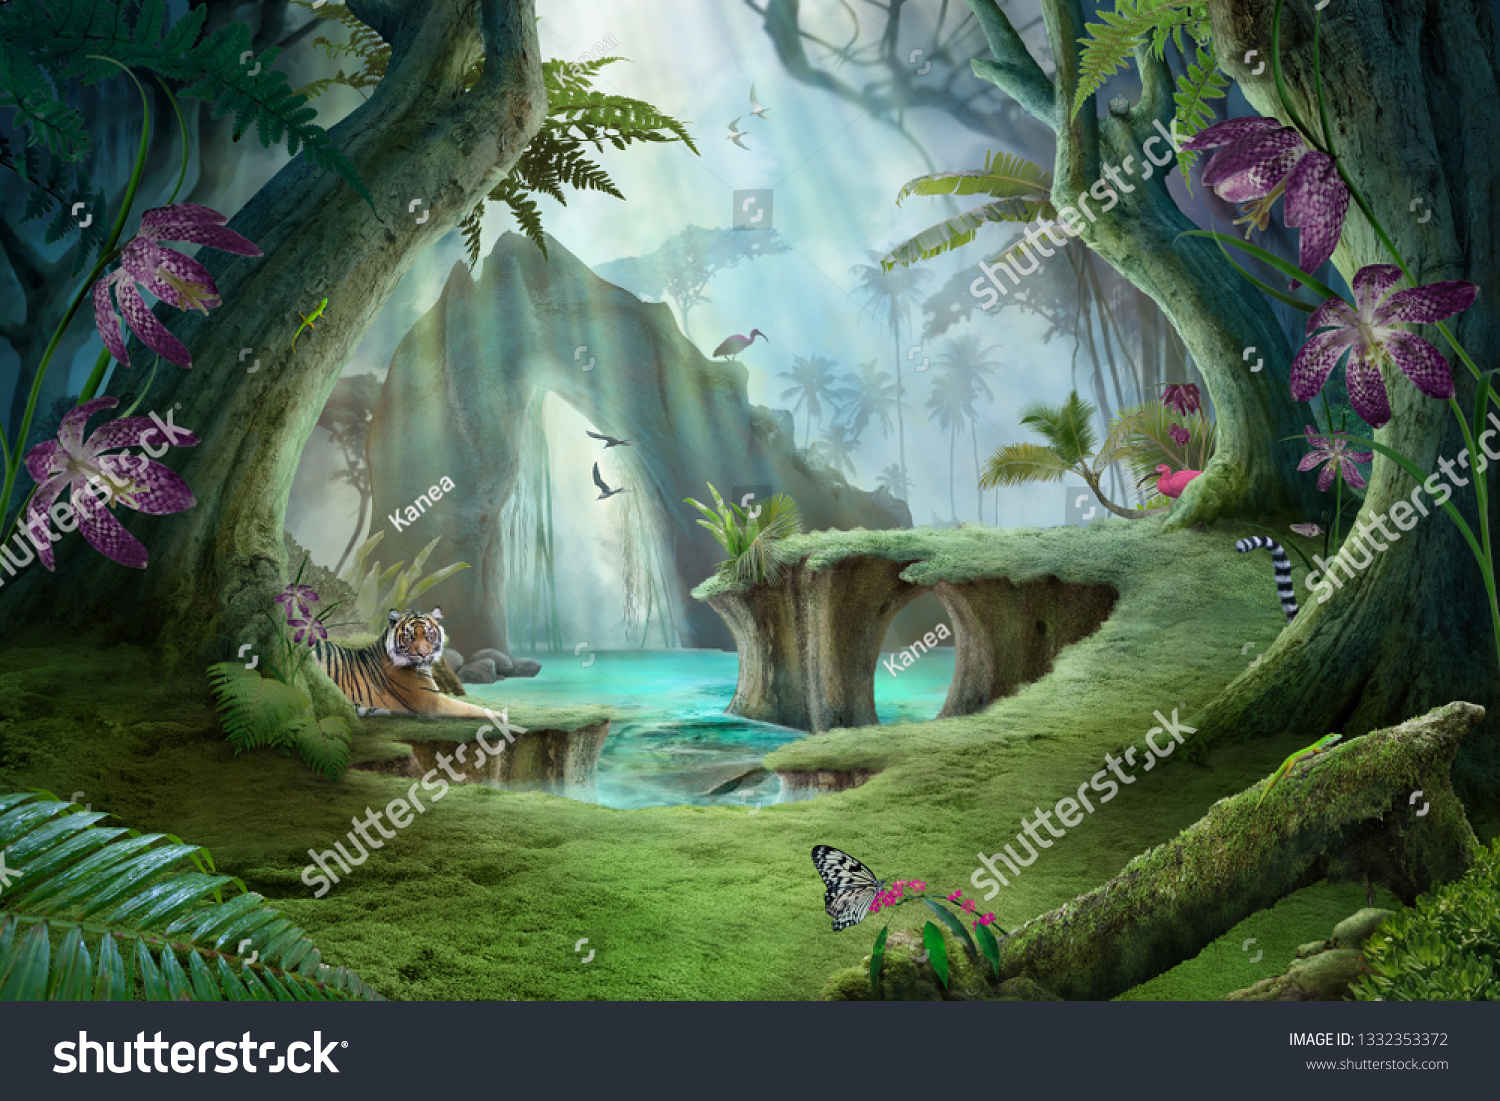 enchanted jungle lake landscape with tiger, can be used as wallpaper background #1332353372